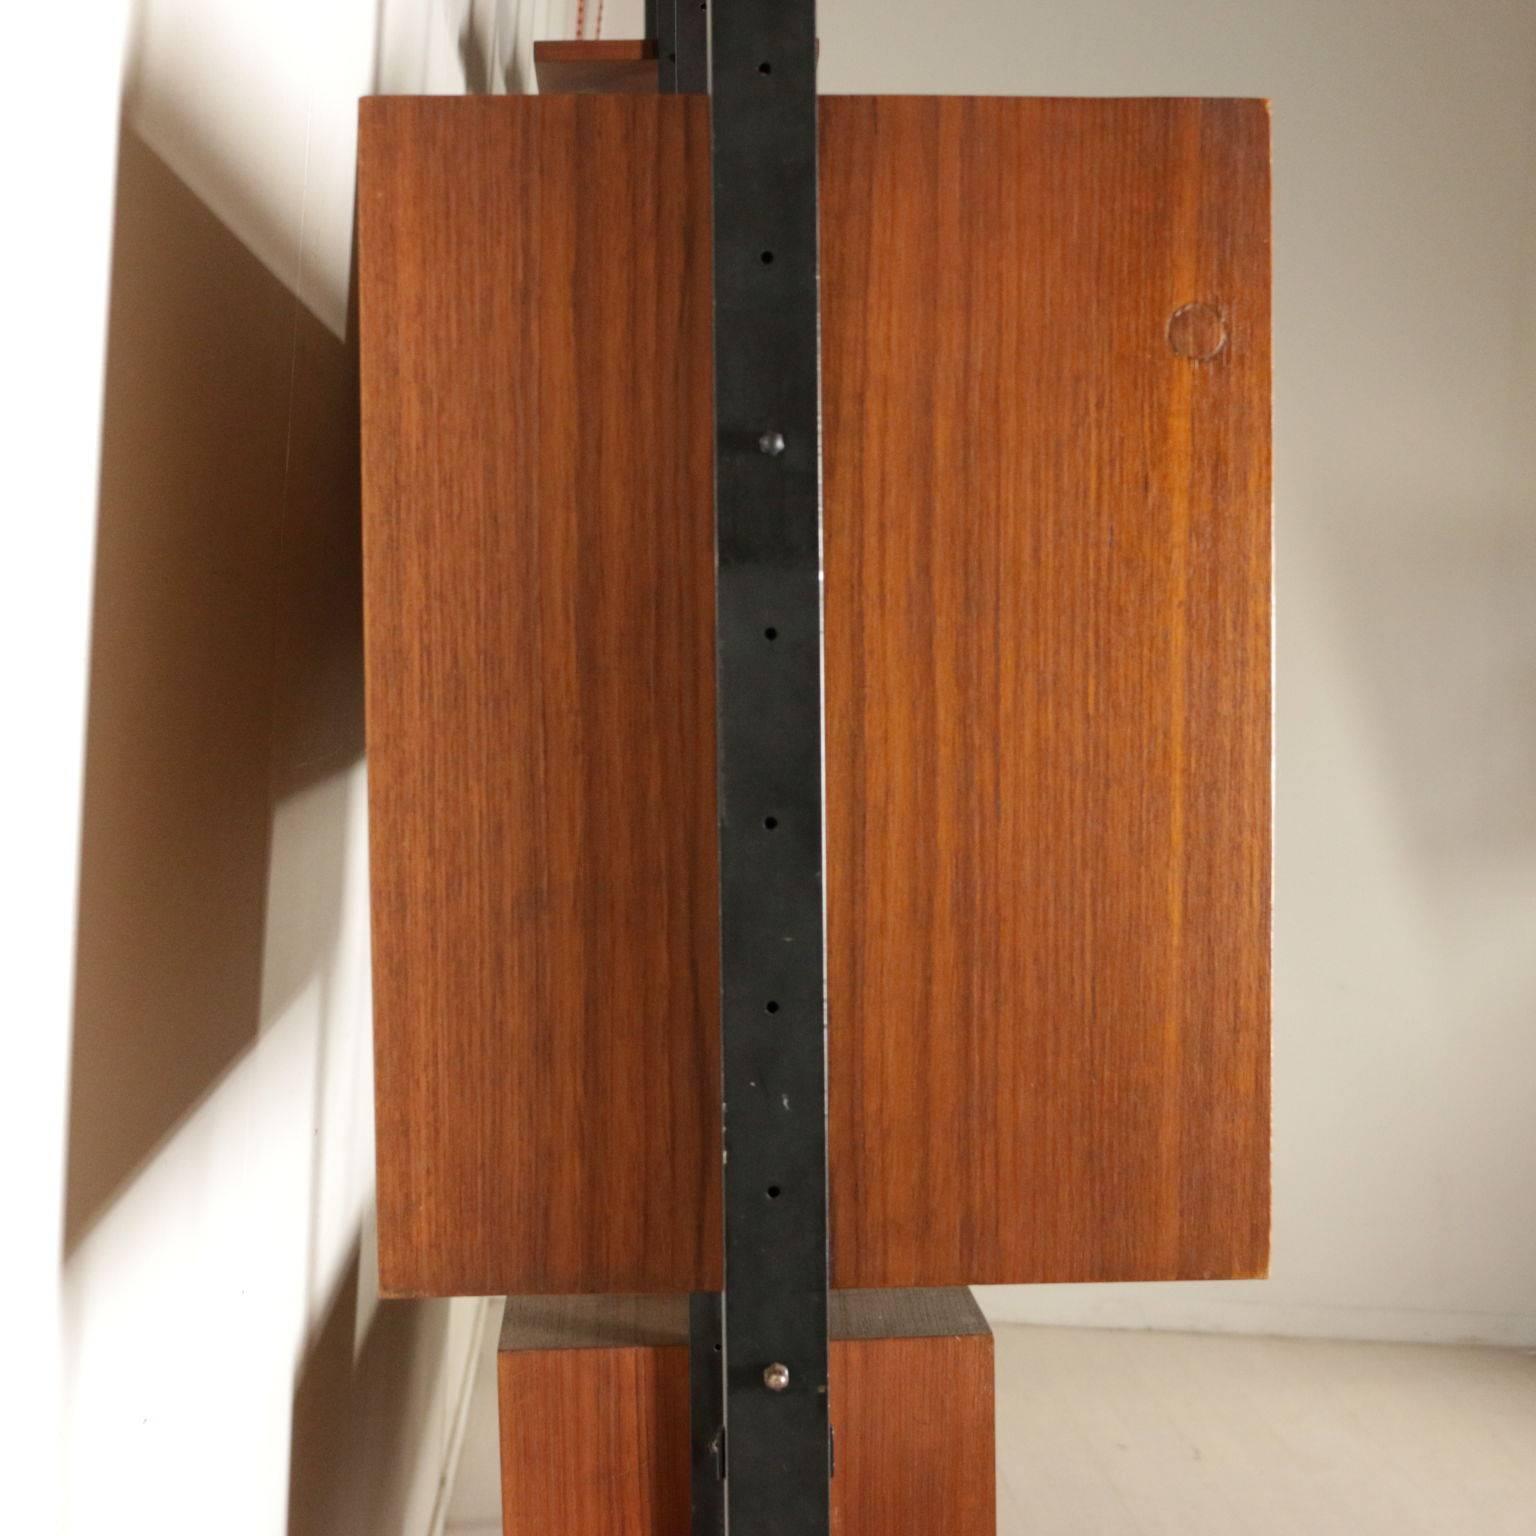 Bookcase Designed by Paolo Tilche Teak Veneer Vintage, Italy, 1950s-1960s 8